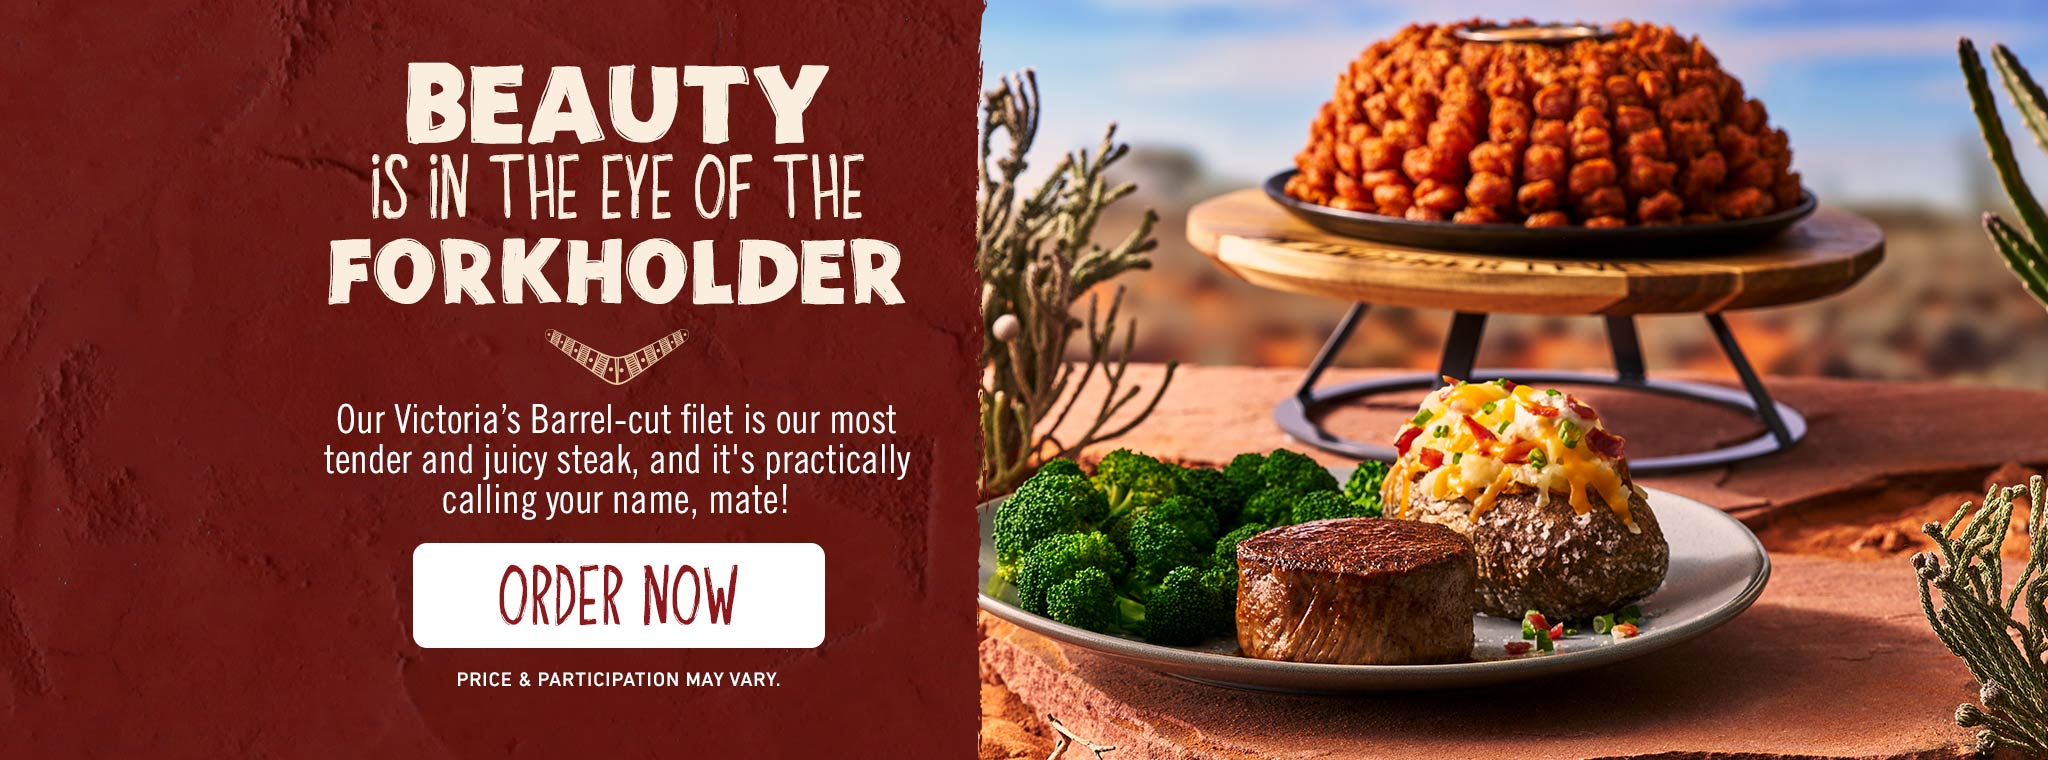 Beauty Is In The Eye Of The Forkholder. Our Victoria's Barrel-cut filet is our most tender and juicy steak, and it's practically calling your name, mate! ORDER NOW. Price & participation may vary. 